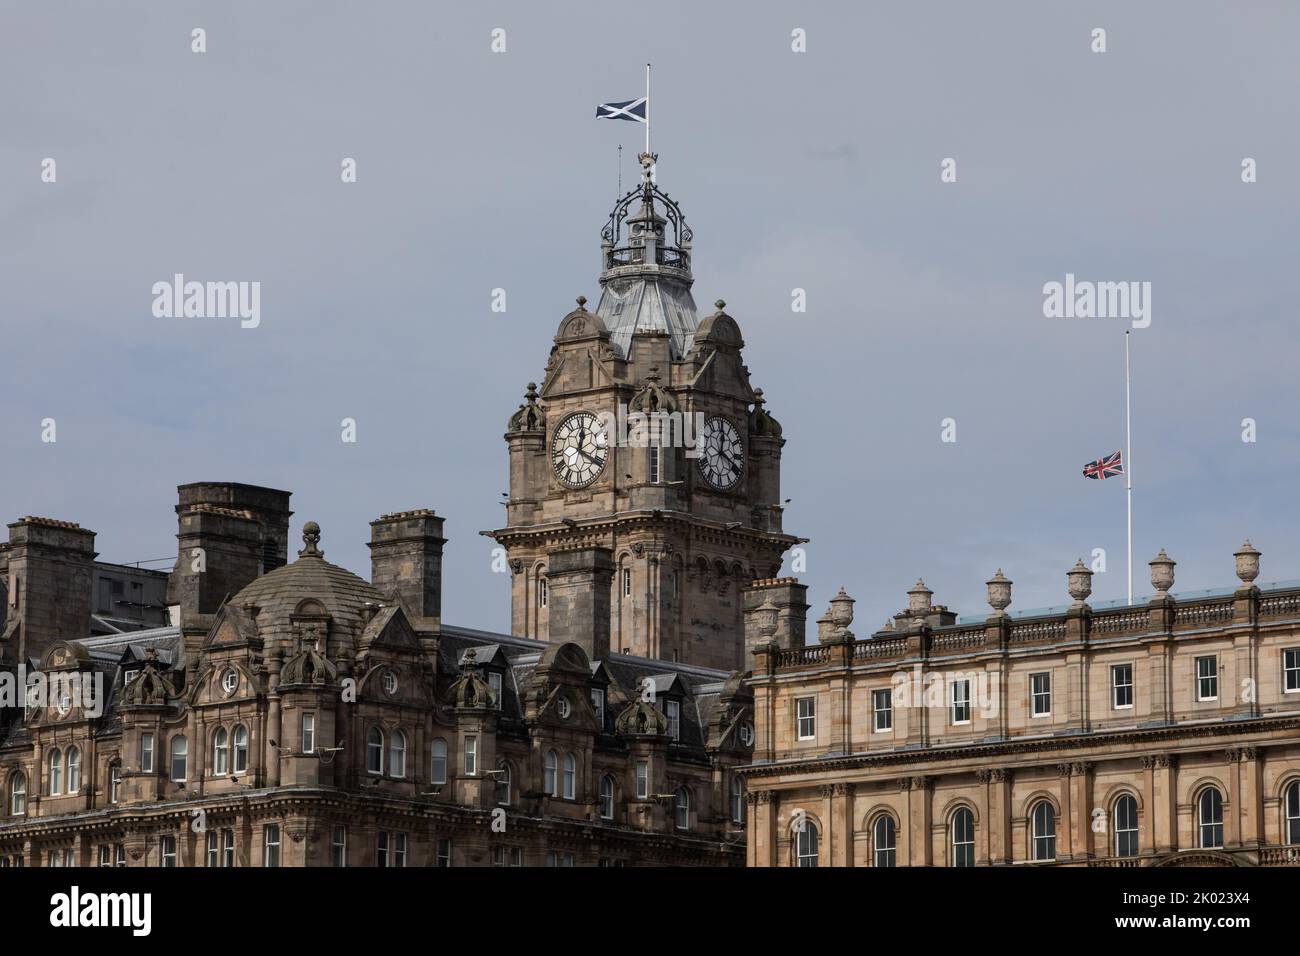 Edinburgh, Scotland, 9 September 2022. Union and Scottish Saltire flags fly at half mast as a mark of respect for Her Majesty Queen Elizabeth II, who has died aged 96, on The Balmoral Hotel (left), in Edinburgh, Scotland, 9 September 2022. Photo credit: Jeremy Sutton-Hibbert/ Alamy Live news. Stock Photo